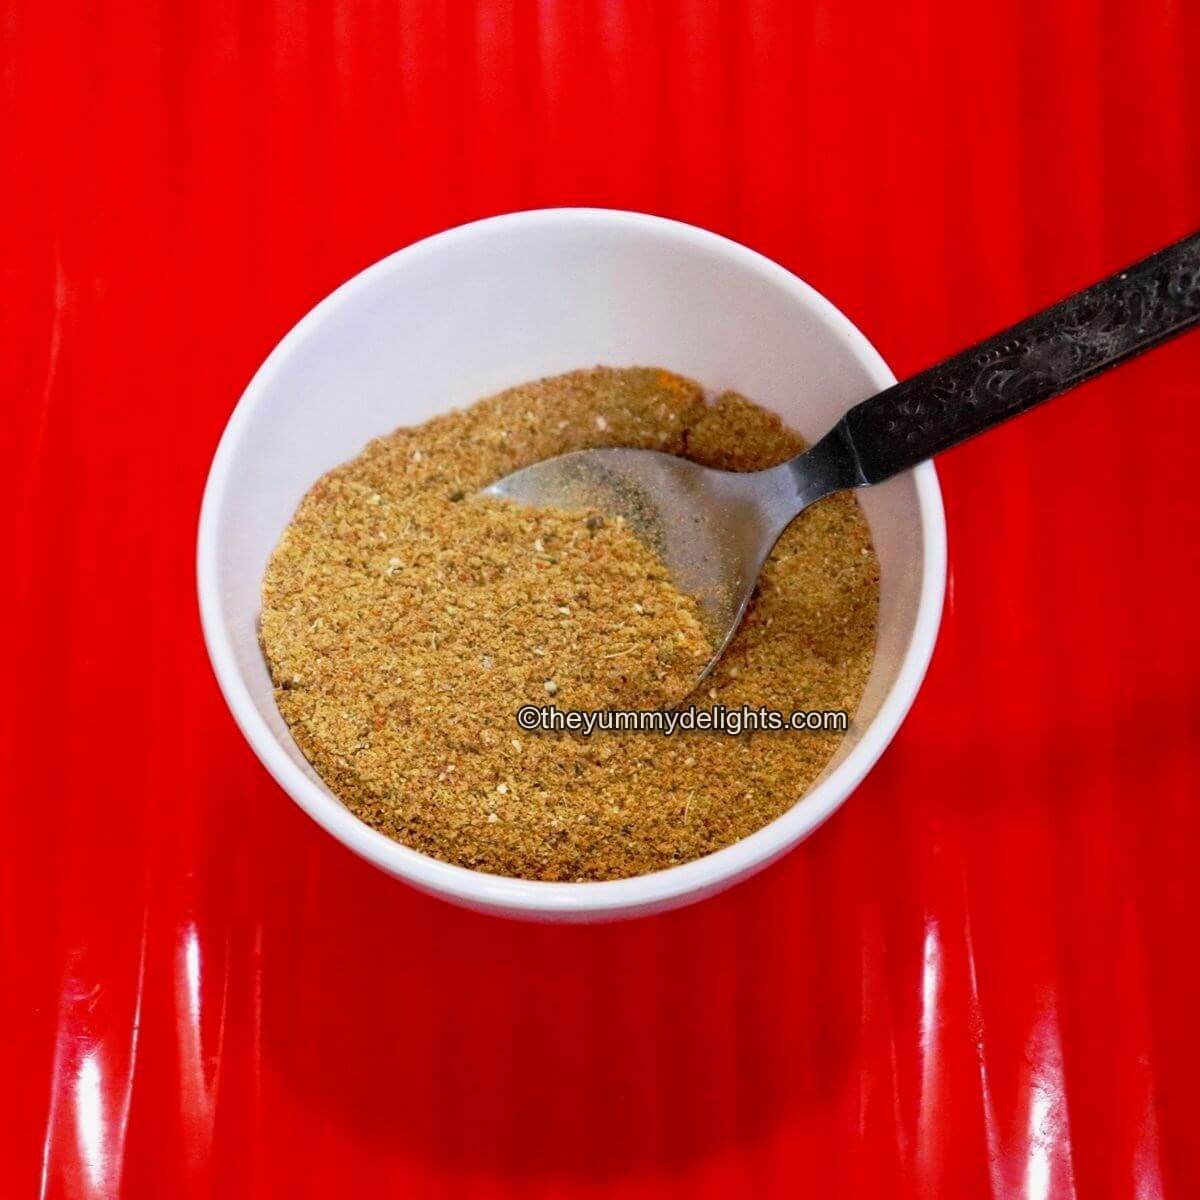 close-up of homemade curry powder in a white colored bowl with a spoon in it. The bowl is placed on a red colored plate.